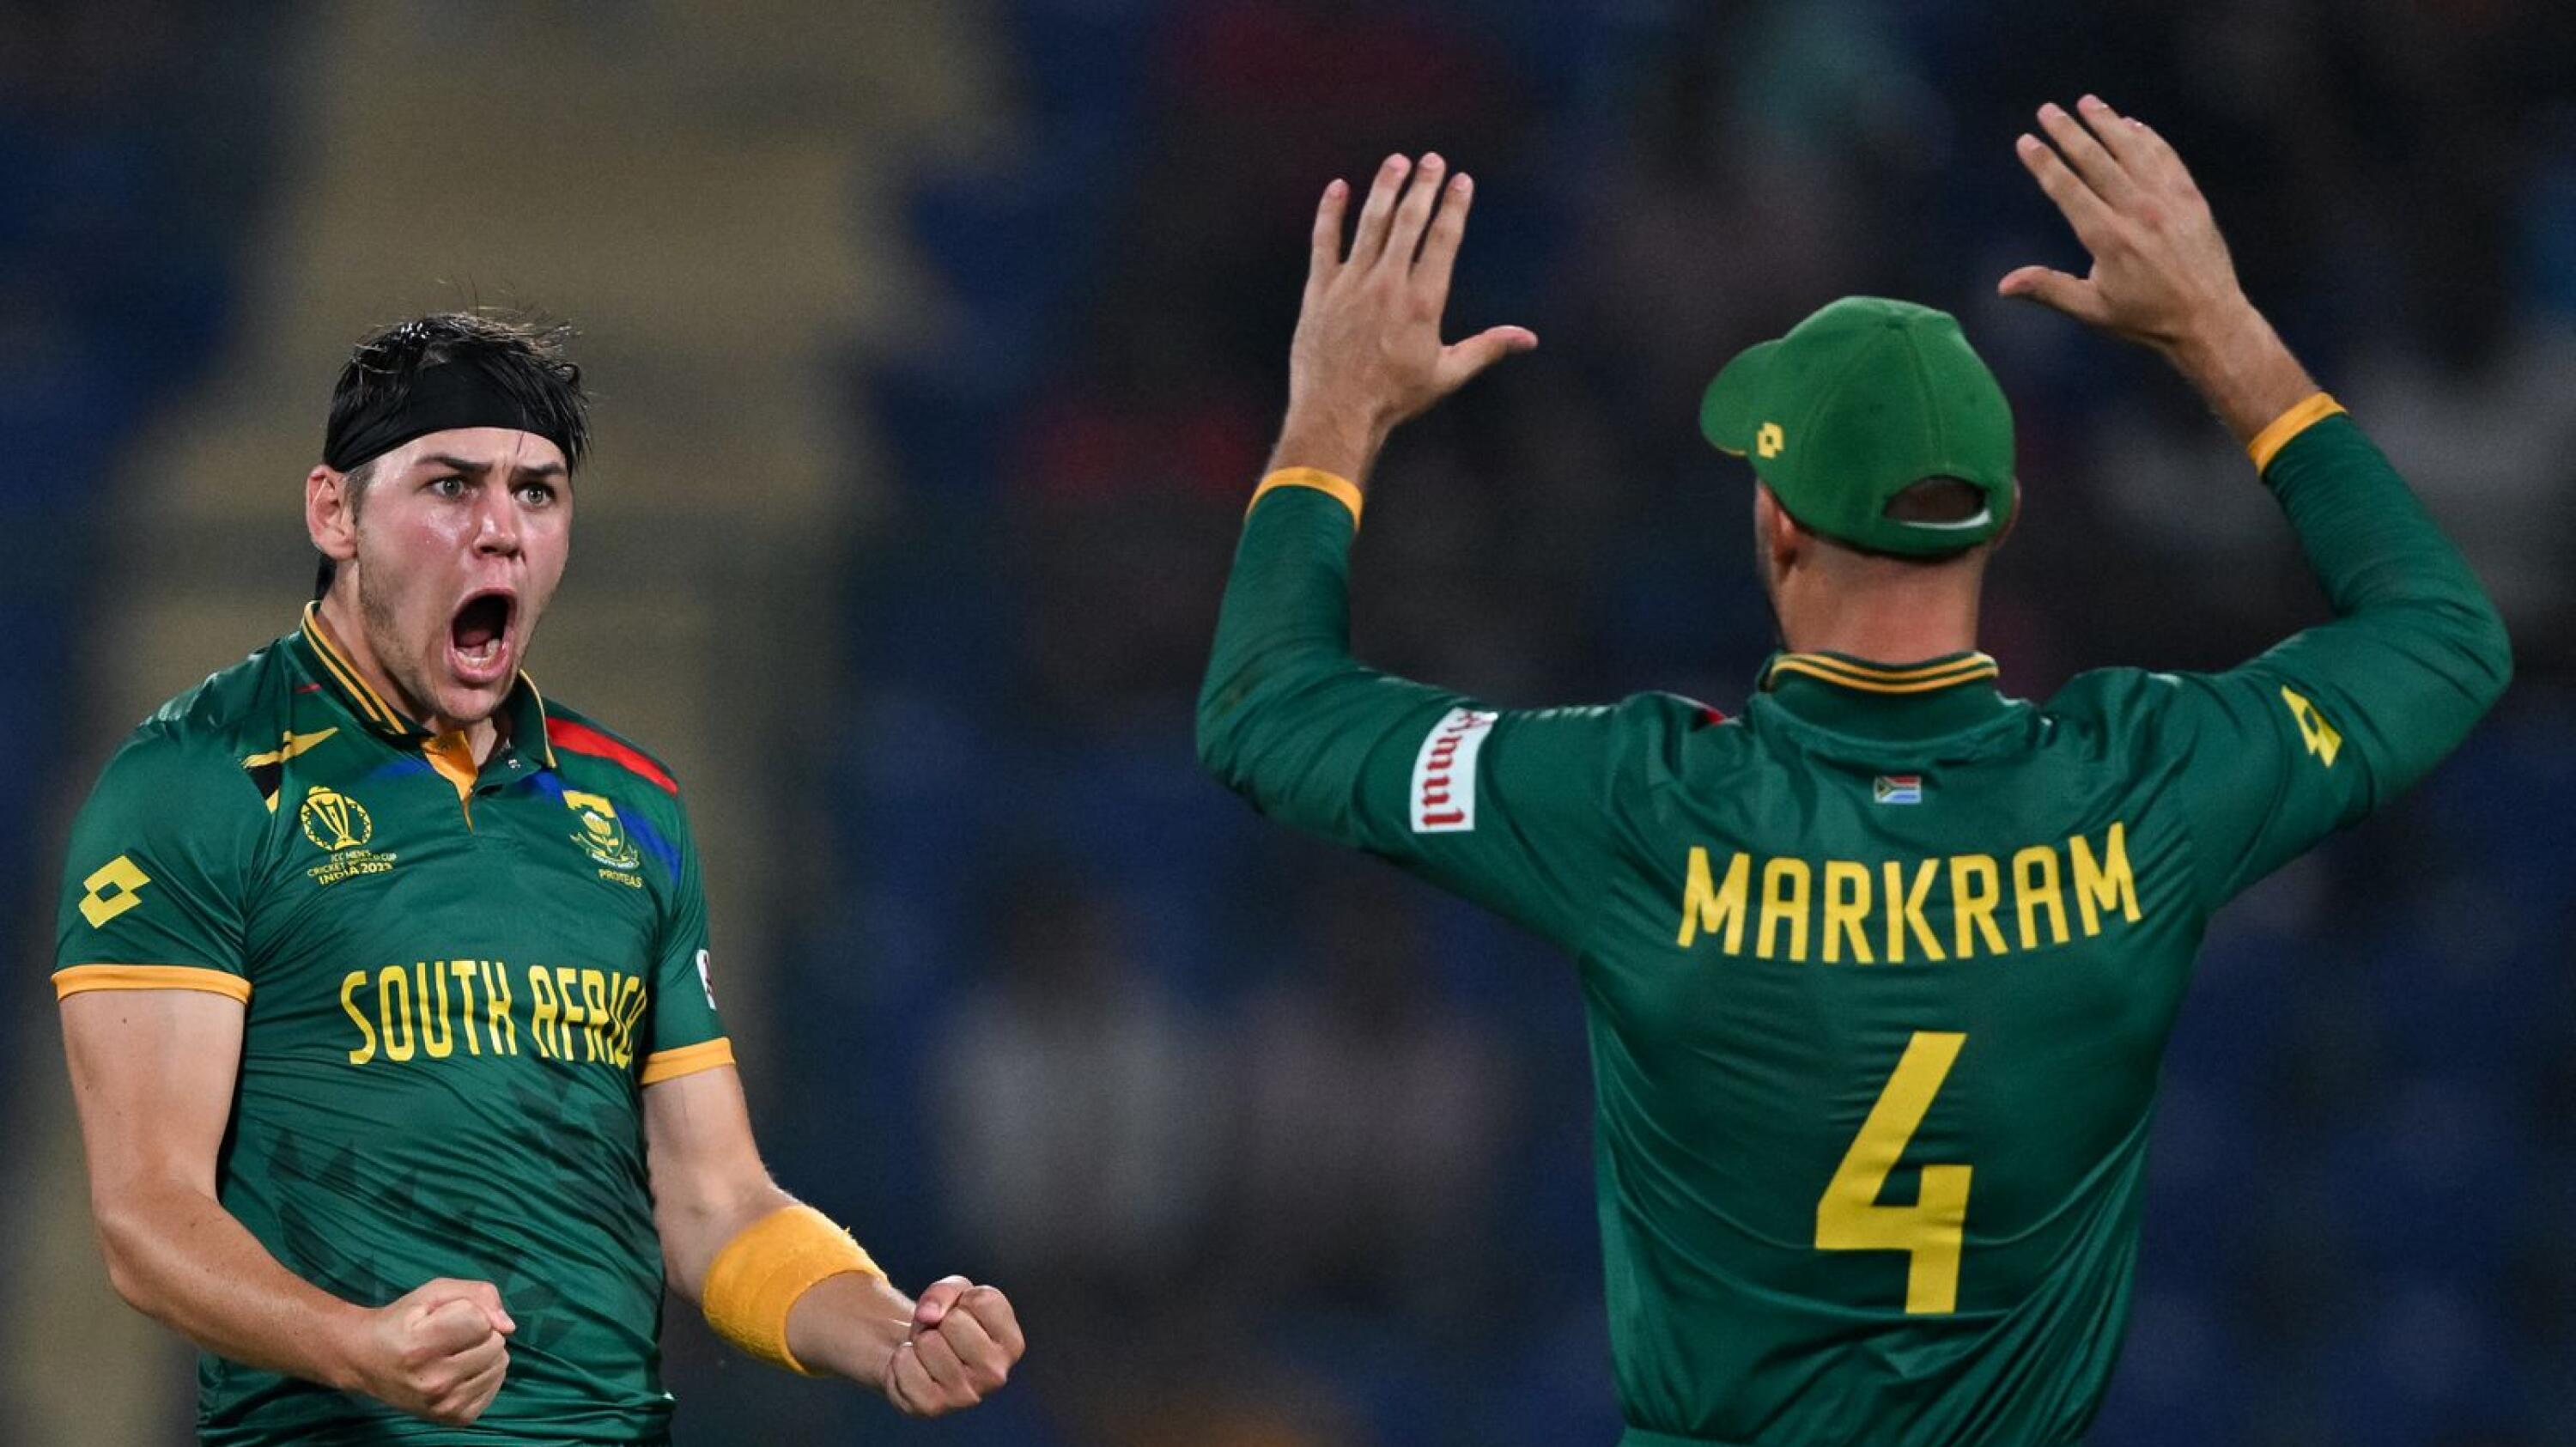 South Africa's Gerald Coetzee celebrates with teammate Aiden Markram after taking the wicket of Sri Lanka's Dunith Wellalage during their Cricket World Cup match